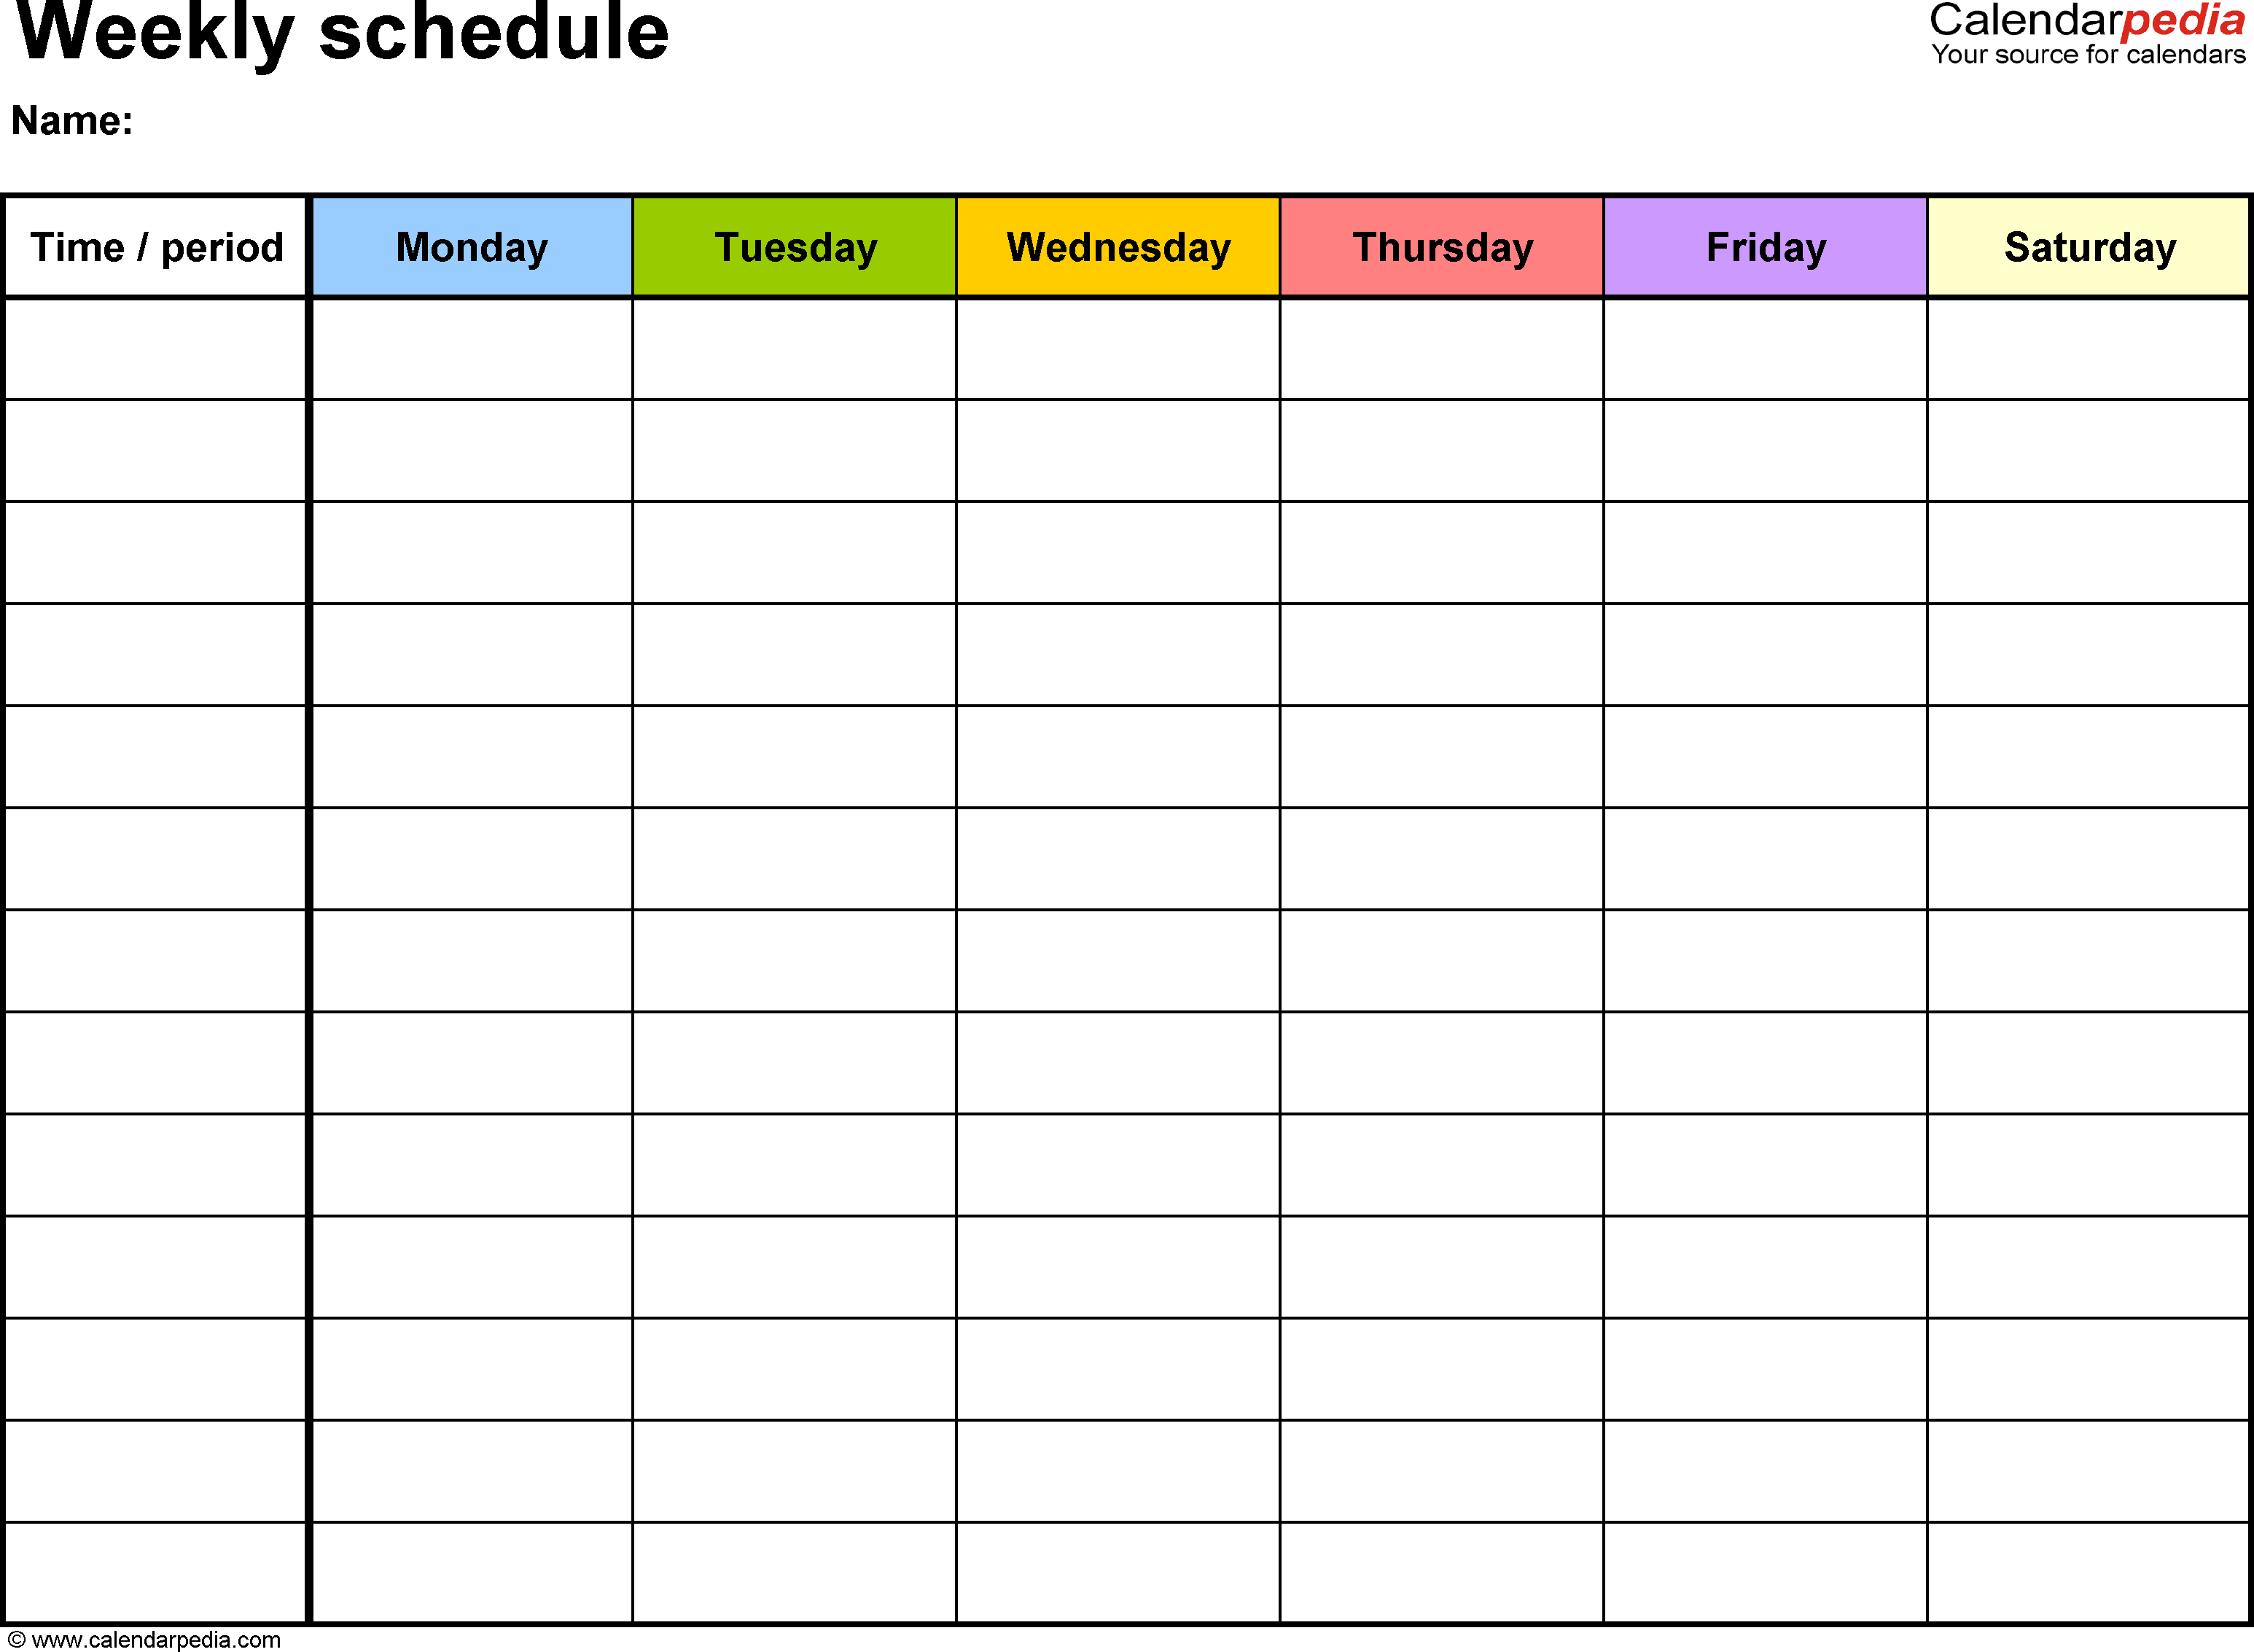 How To Make A Weekly Calendar  Bolan.horizonconsulting.co regarding Free Online Weekly Calendar